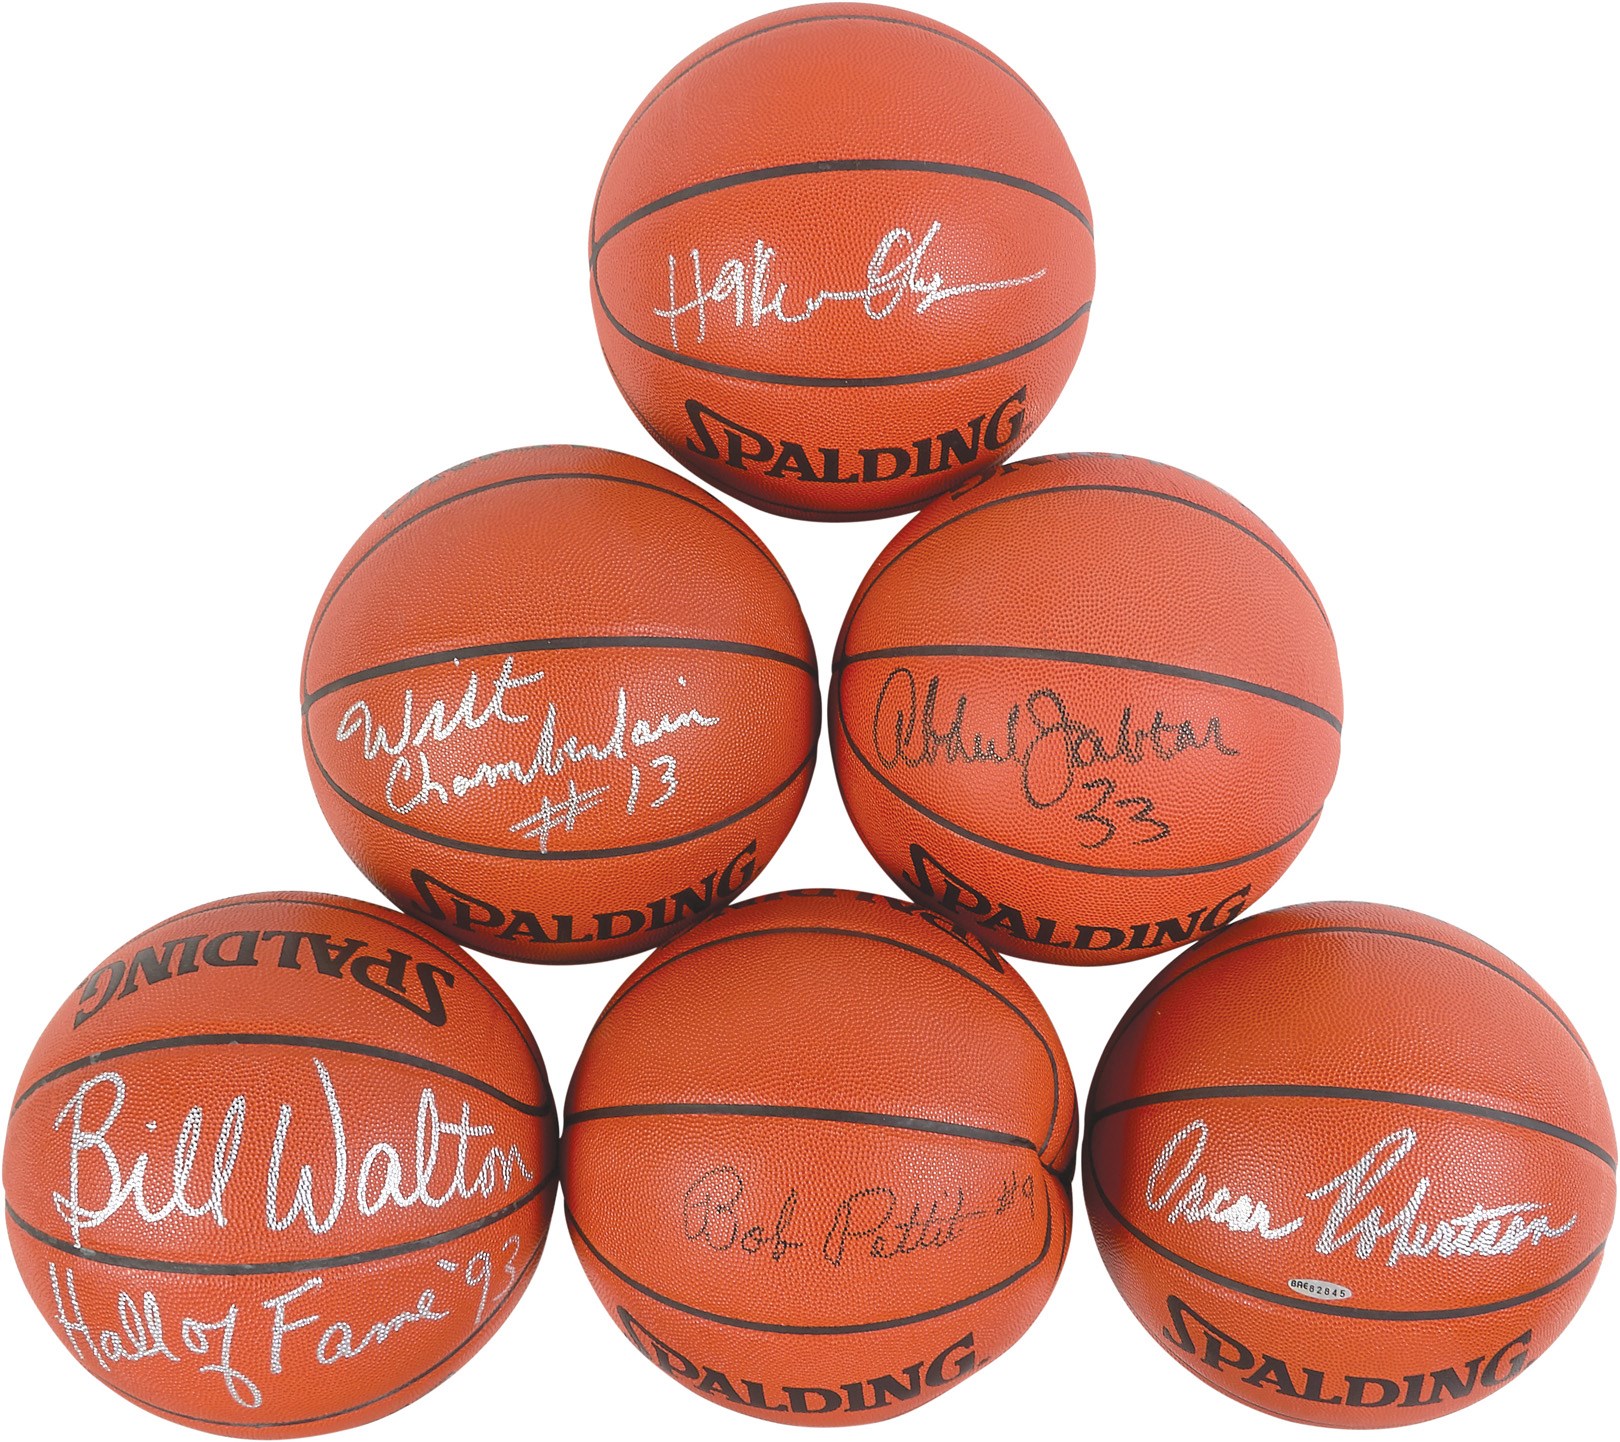 Basketball - NBA 50 Greatest & Legends Signed Basketball Collection with Wilt Chamberlain (11)